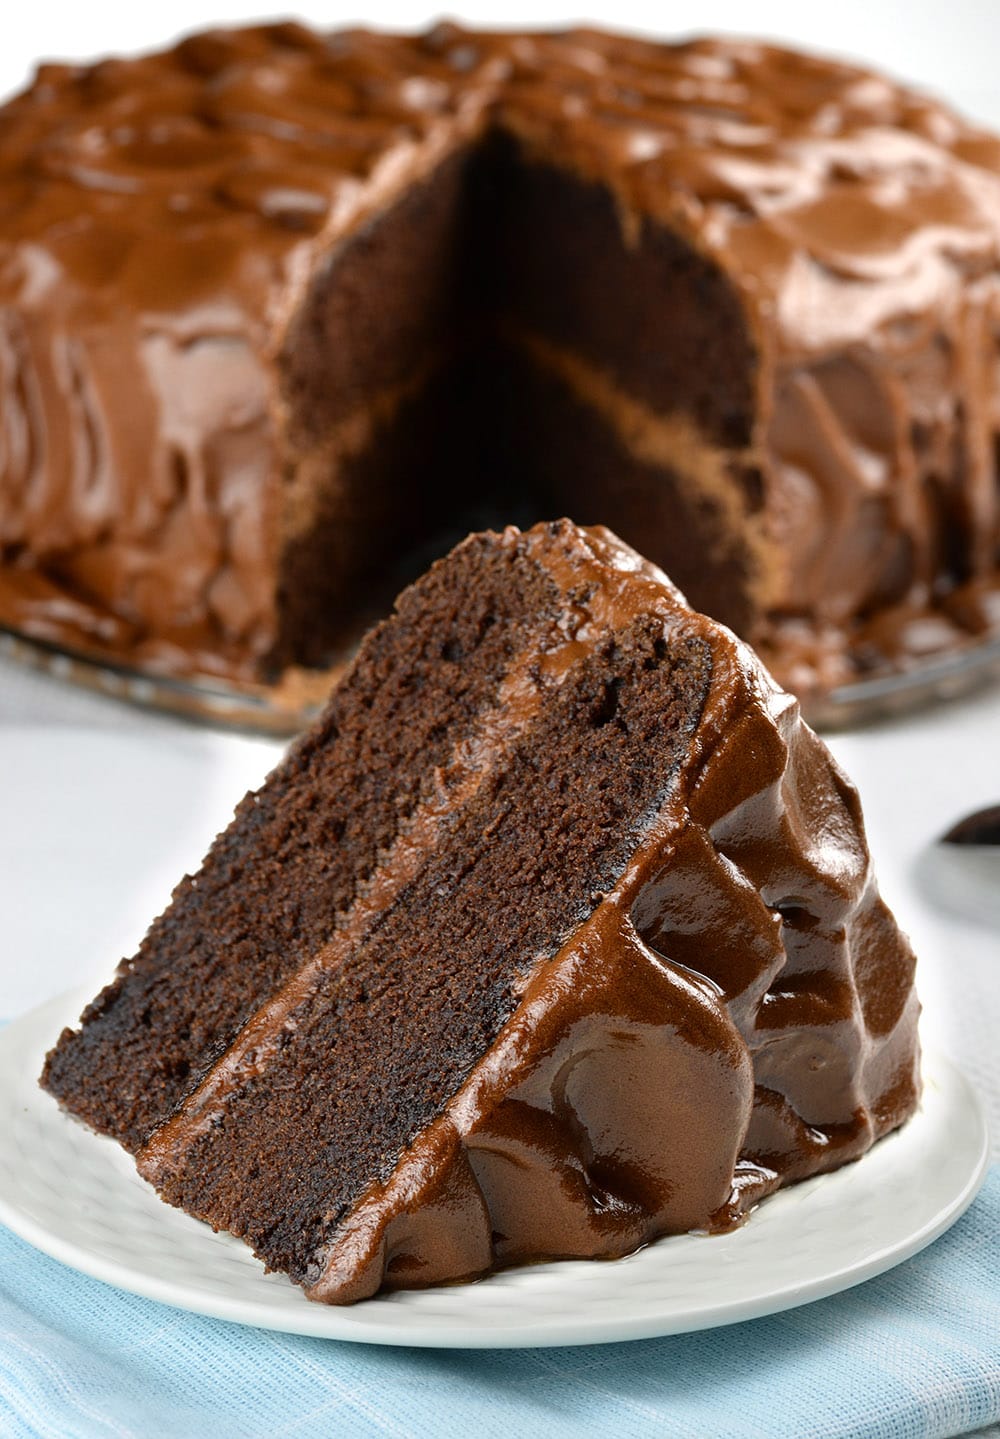 Fast and simple, and you get a moist and chocolatey cake that pleases everyone.